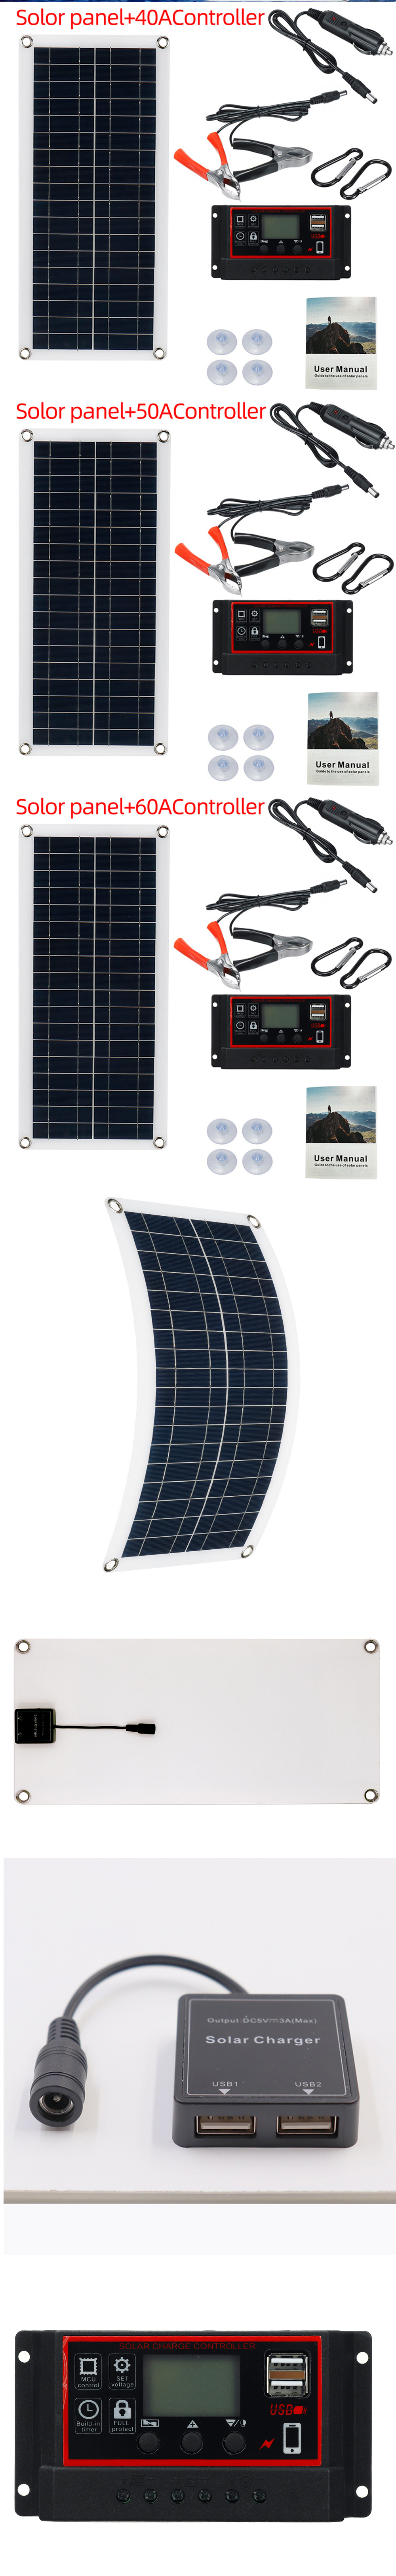 IPReereg-18V-Solar-Power-System-Waterproof-Emergency-USB-Charging-Solar-Panel-With-40A50A60A-Charger-1920019-3